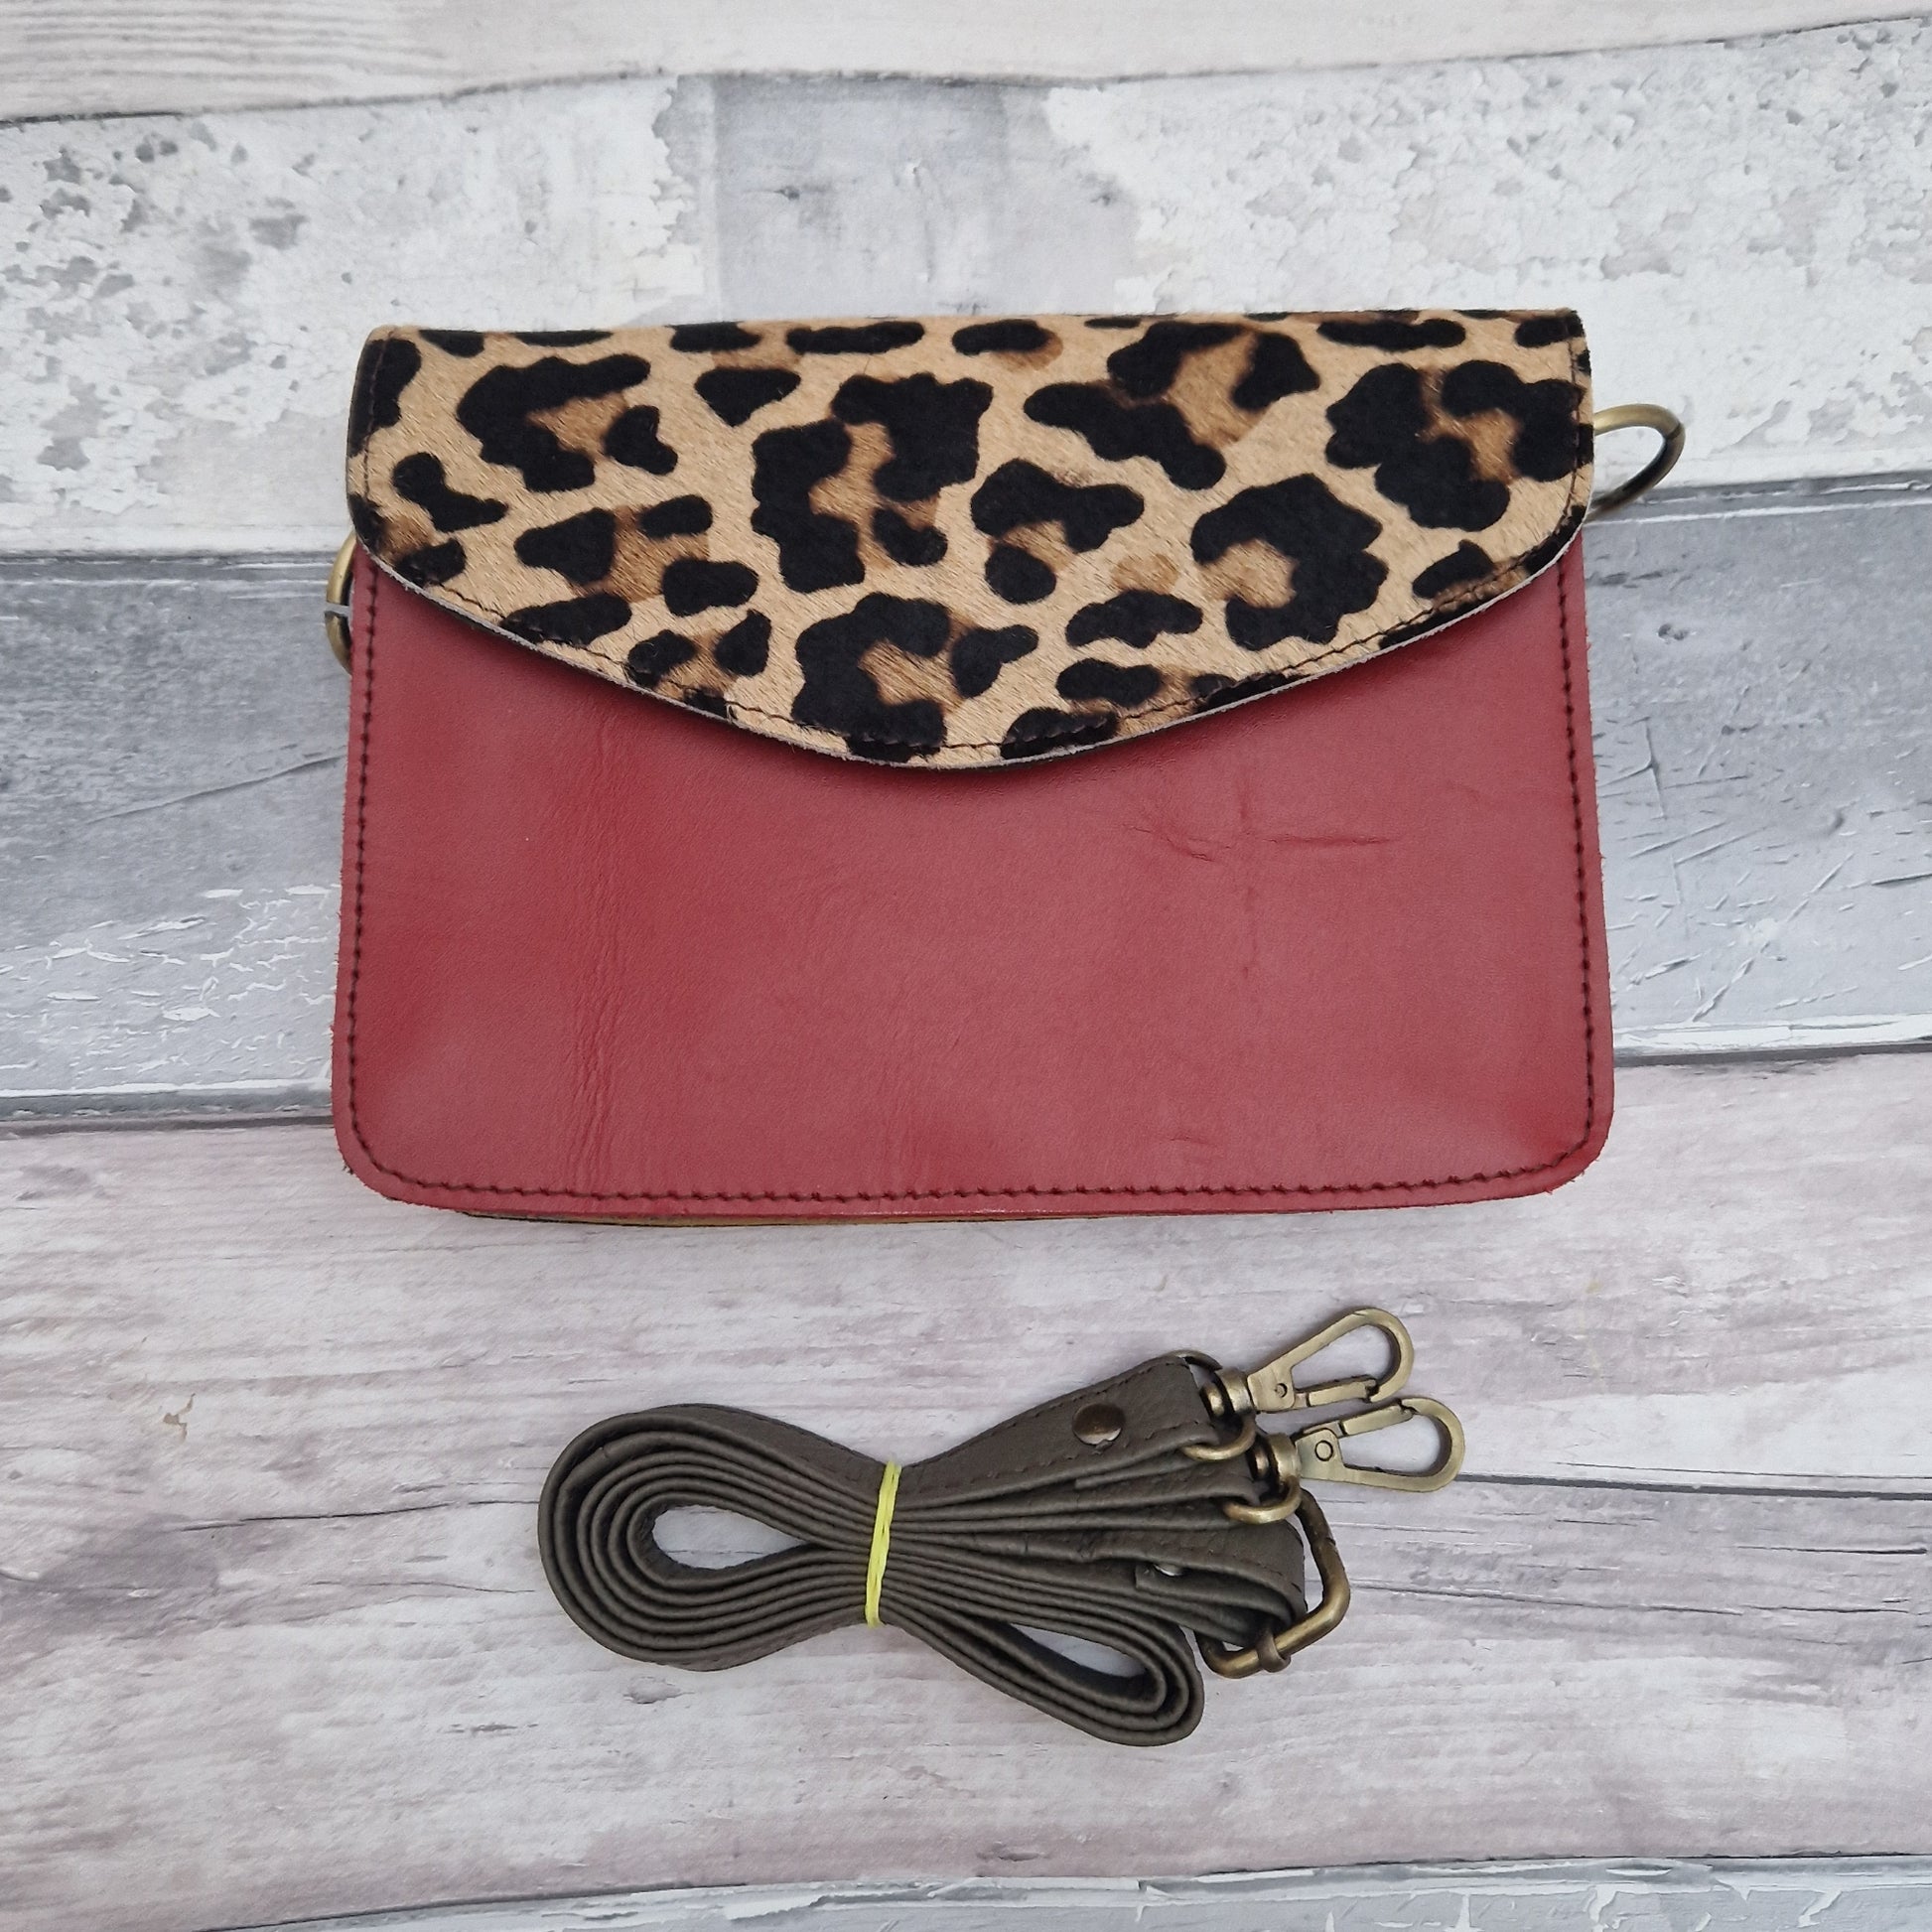 Red leather envelope style bag with a leopard print panel.